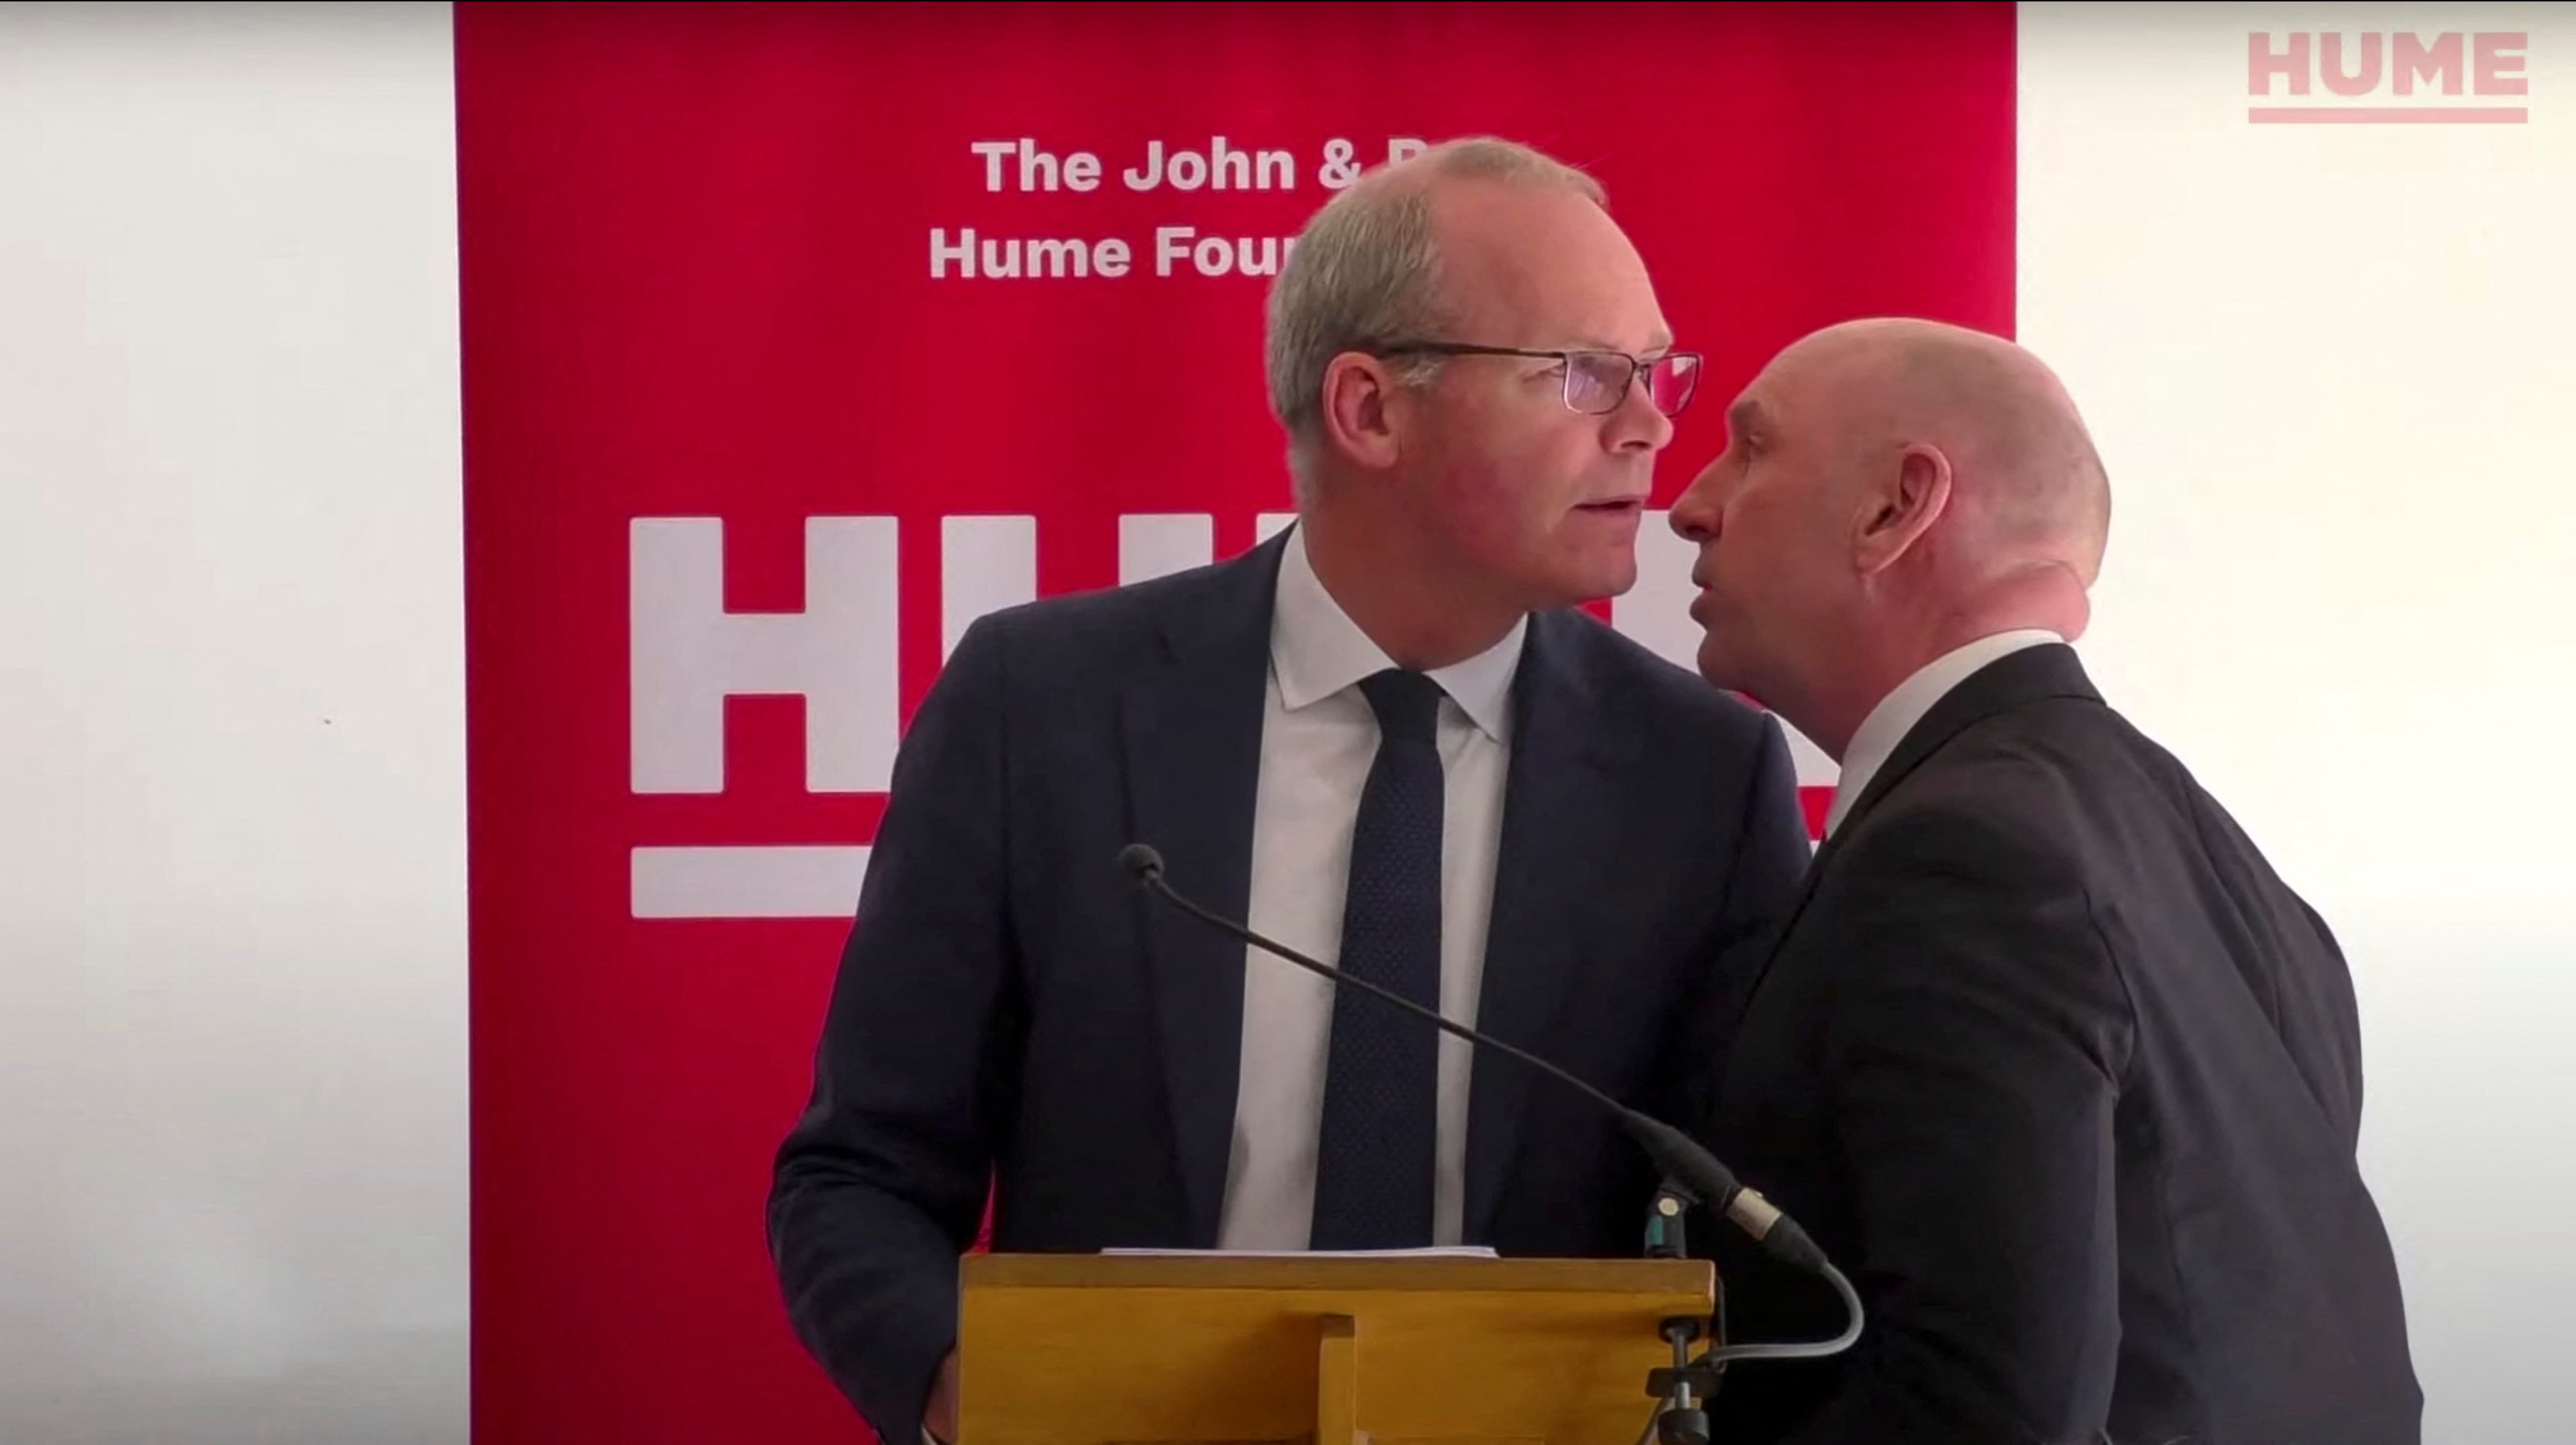 Irish Foreign Minister Simon Coveney learns about a potential security threat during his speech at an event of the The John And Pat Hume Foundation in Belfast